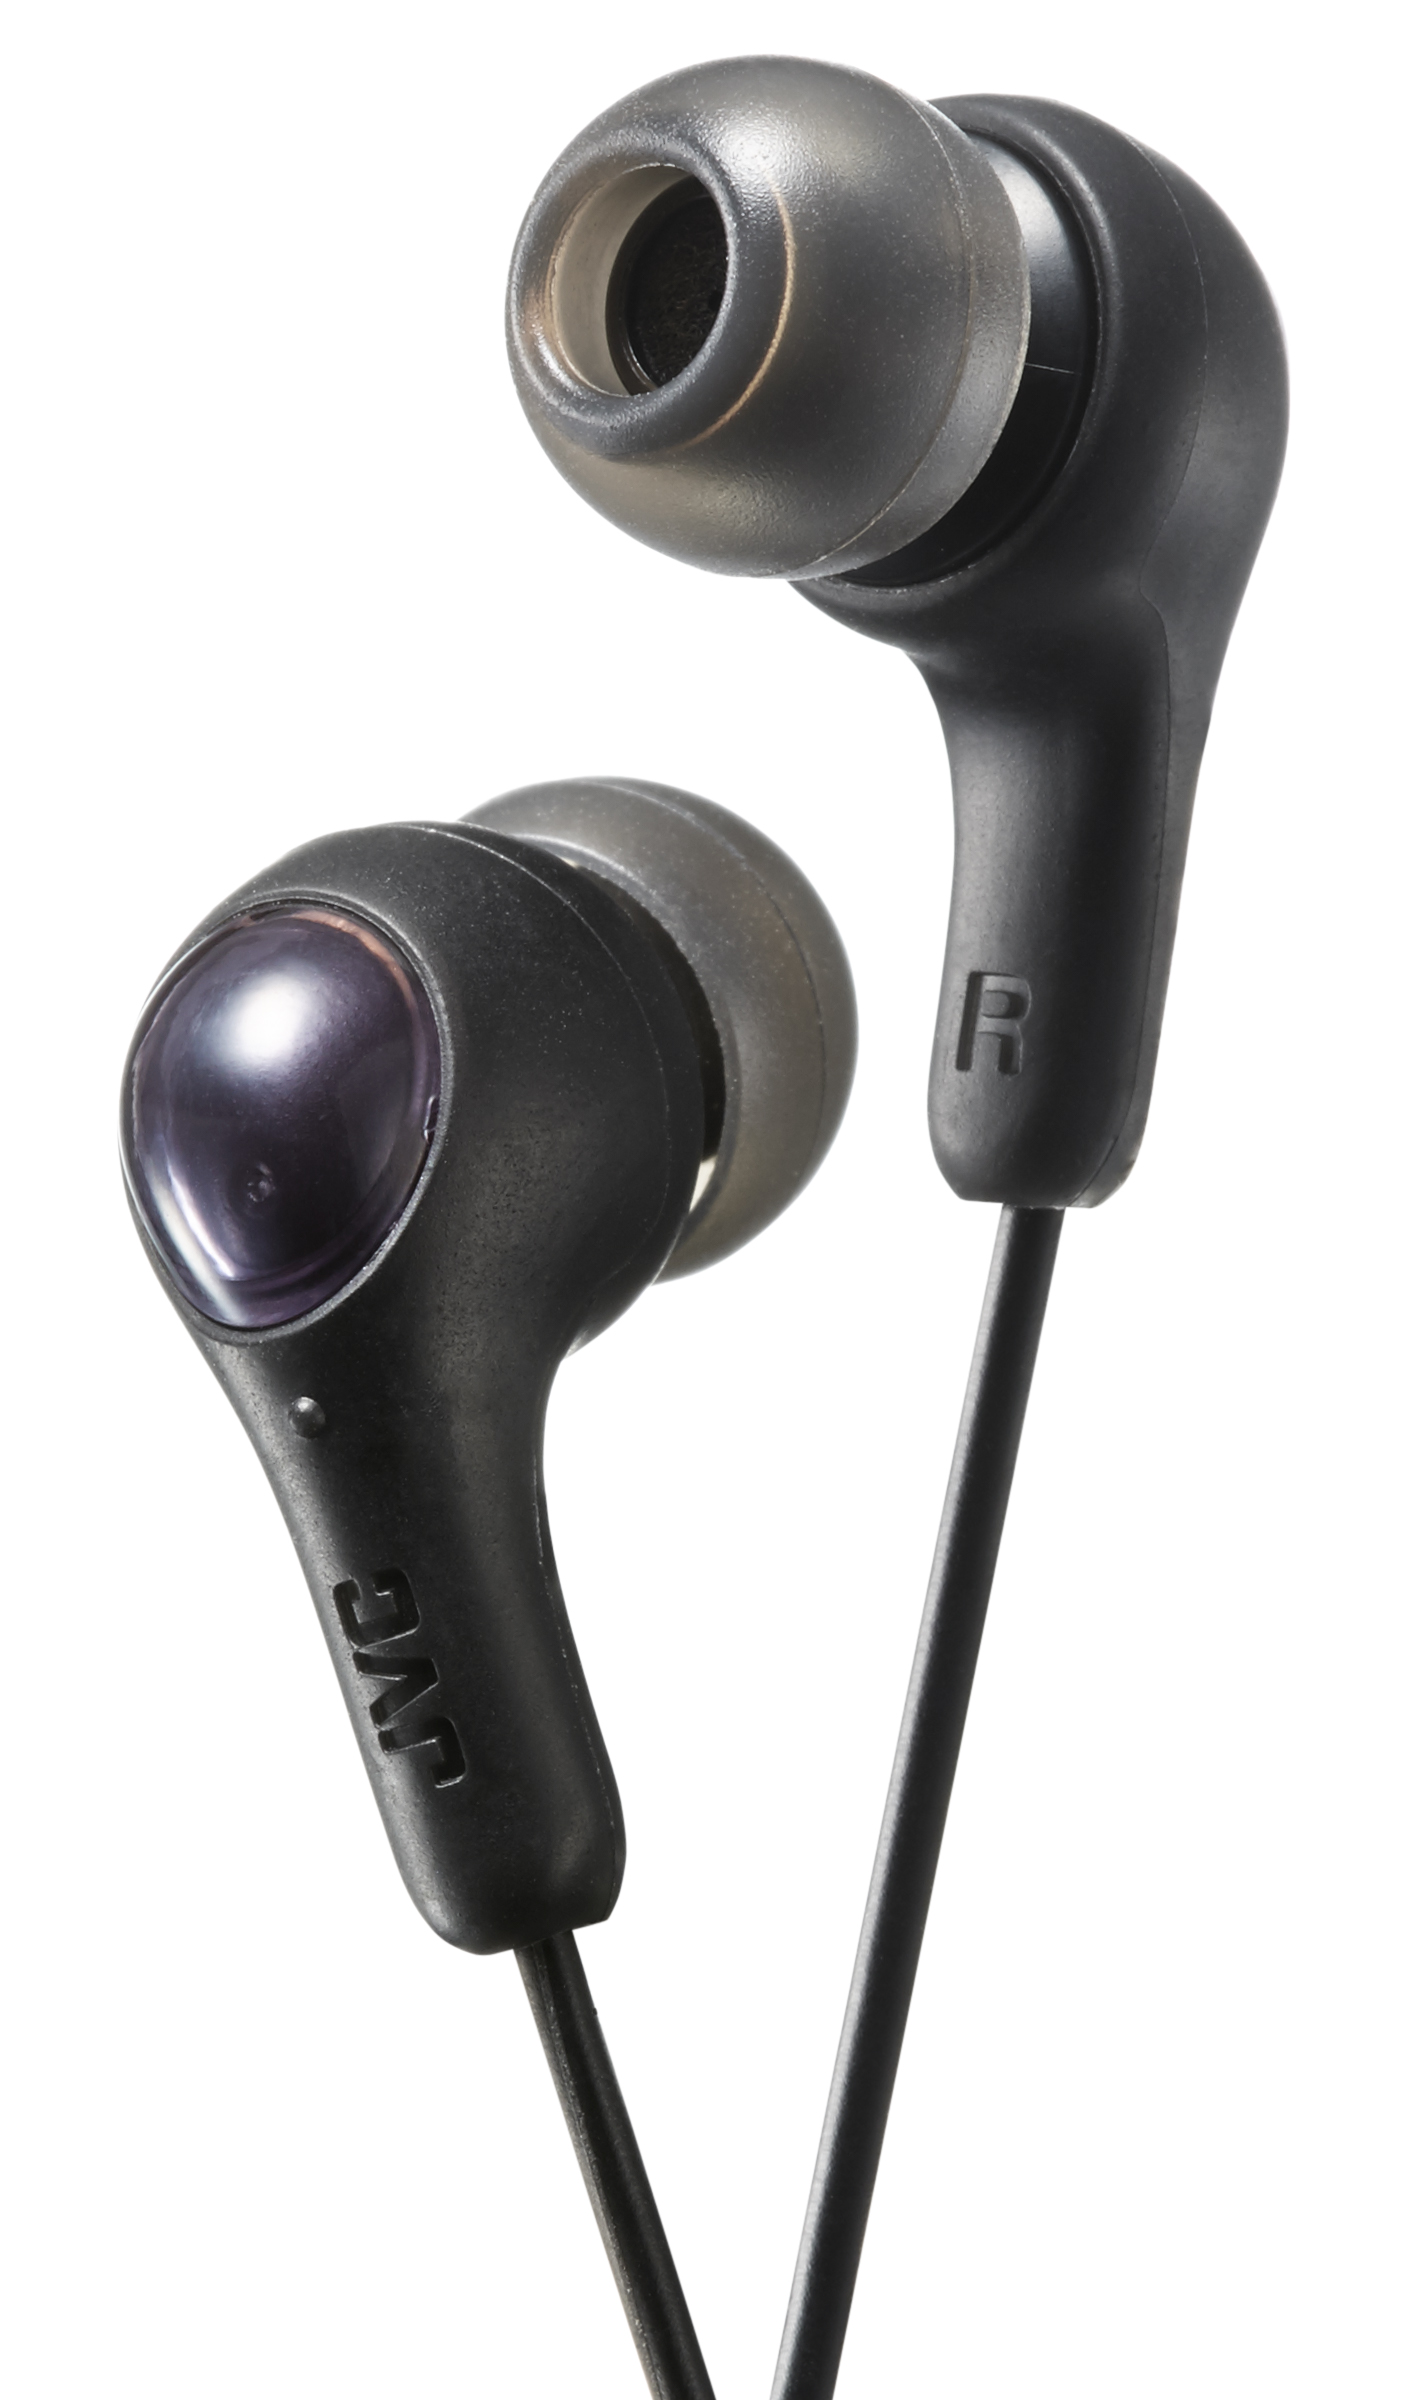 JVC Gumy Plus Earbuds - in Ear Headphones (HA-FX7BN), Powerful Bass Sound, Comfortable and Secure Fit, Comes with S/M/L Silicone Ear Pieces, 3.3 ft Cord (Black) - image 1 of 6